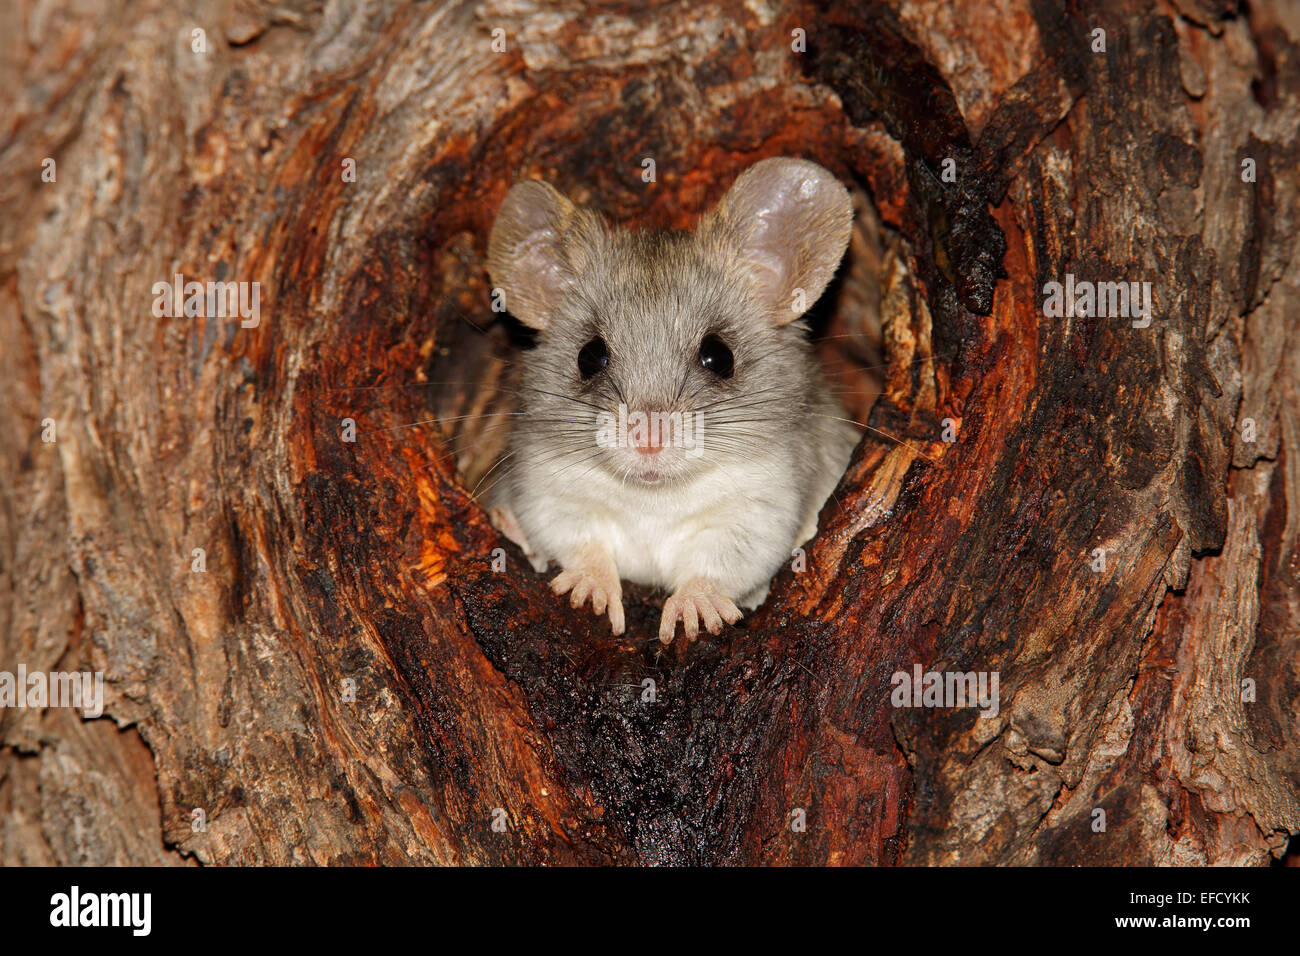 An Acacia tree rat (Thallomys paedulcus) sitting in a hole in a tree, South Africa Stock Photo